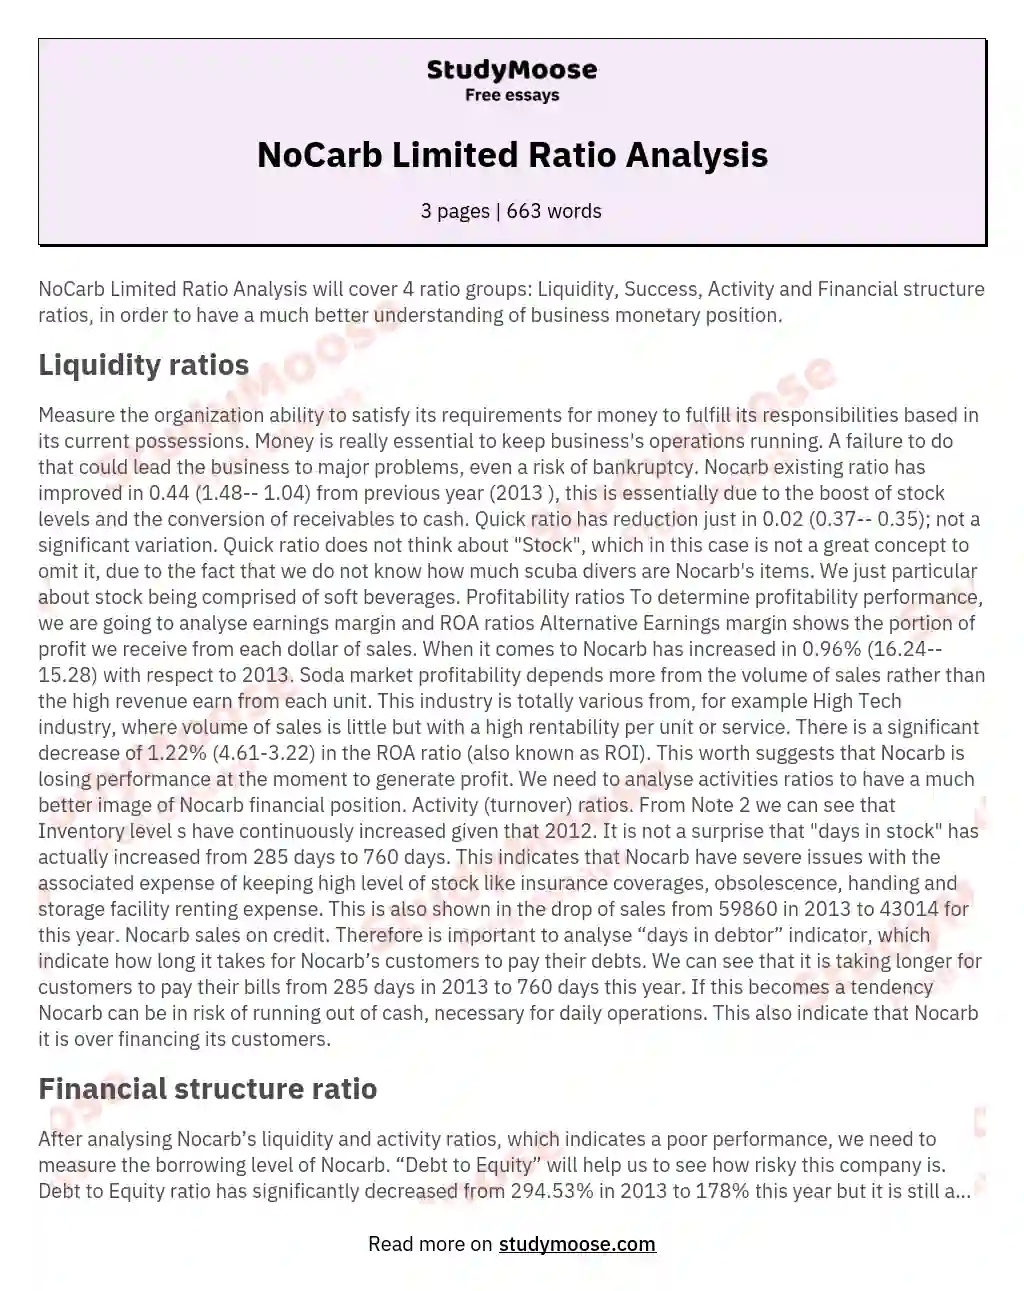 NoCarb Limited Ratio Analysis essay